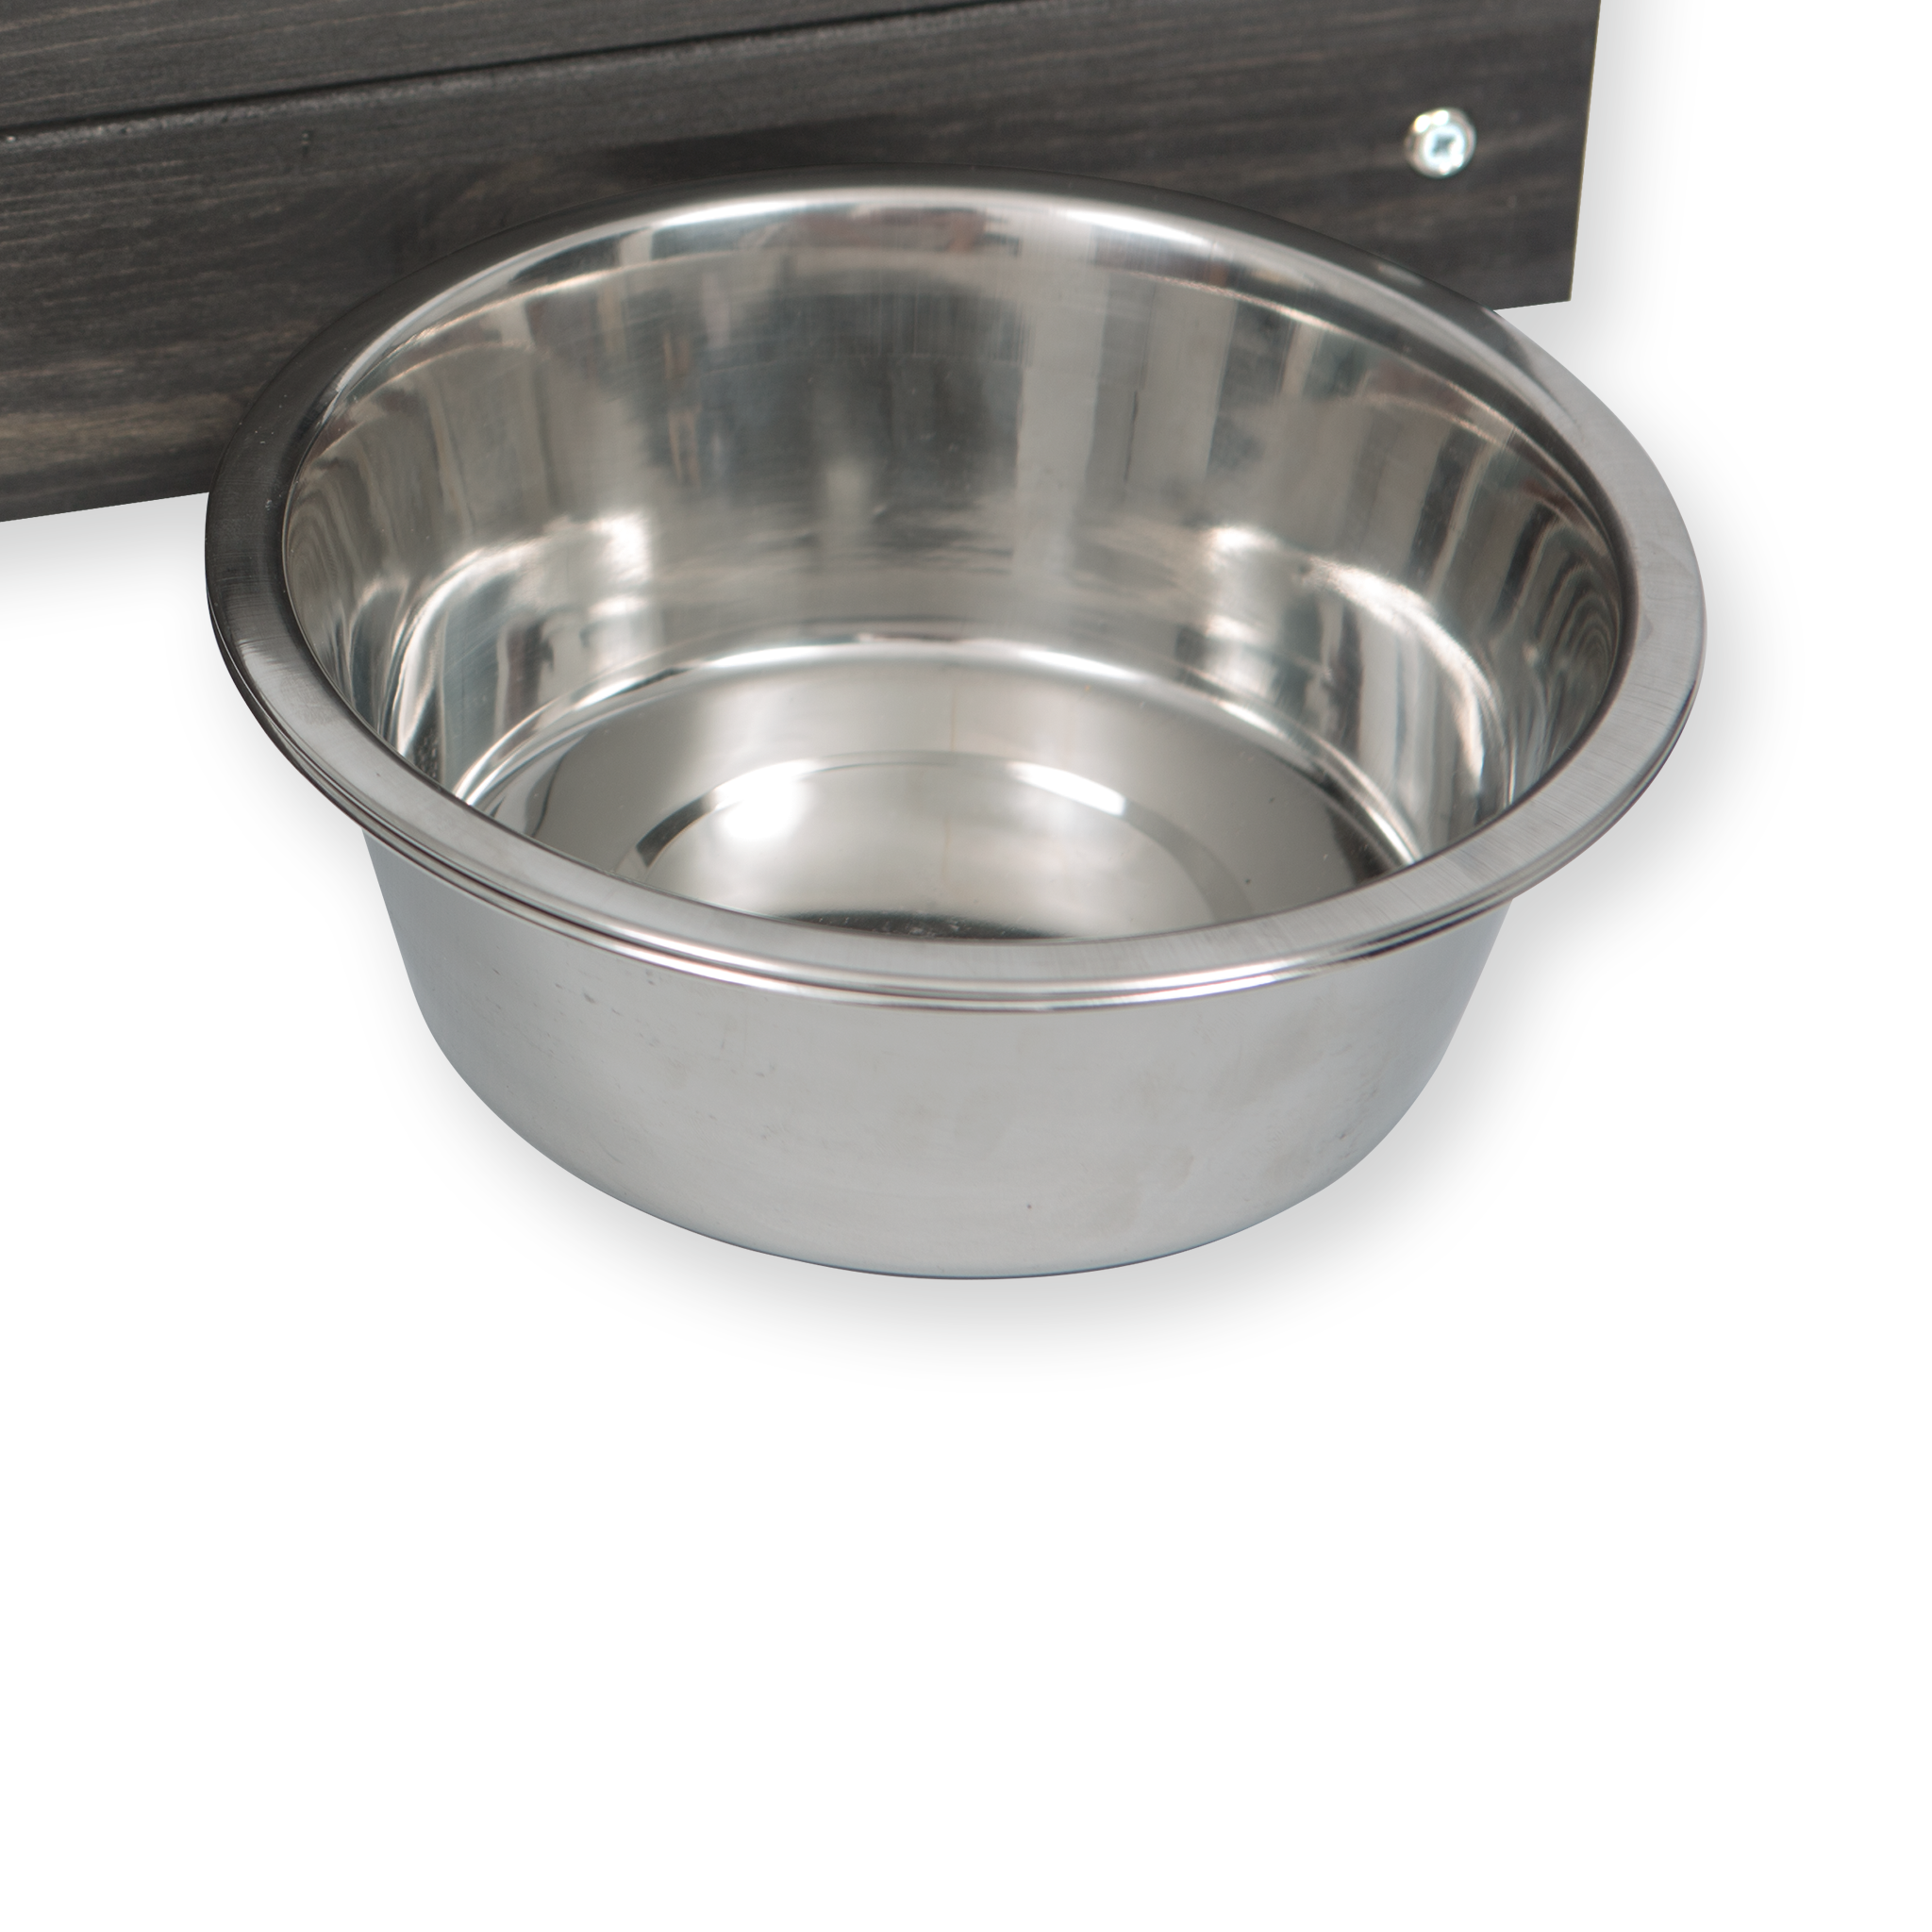 Double Personalised Raised Dog Bowl Stand 10cm High - Ash Grey